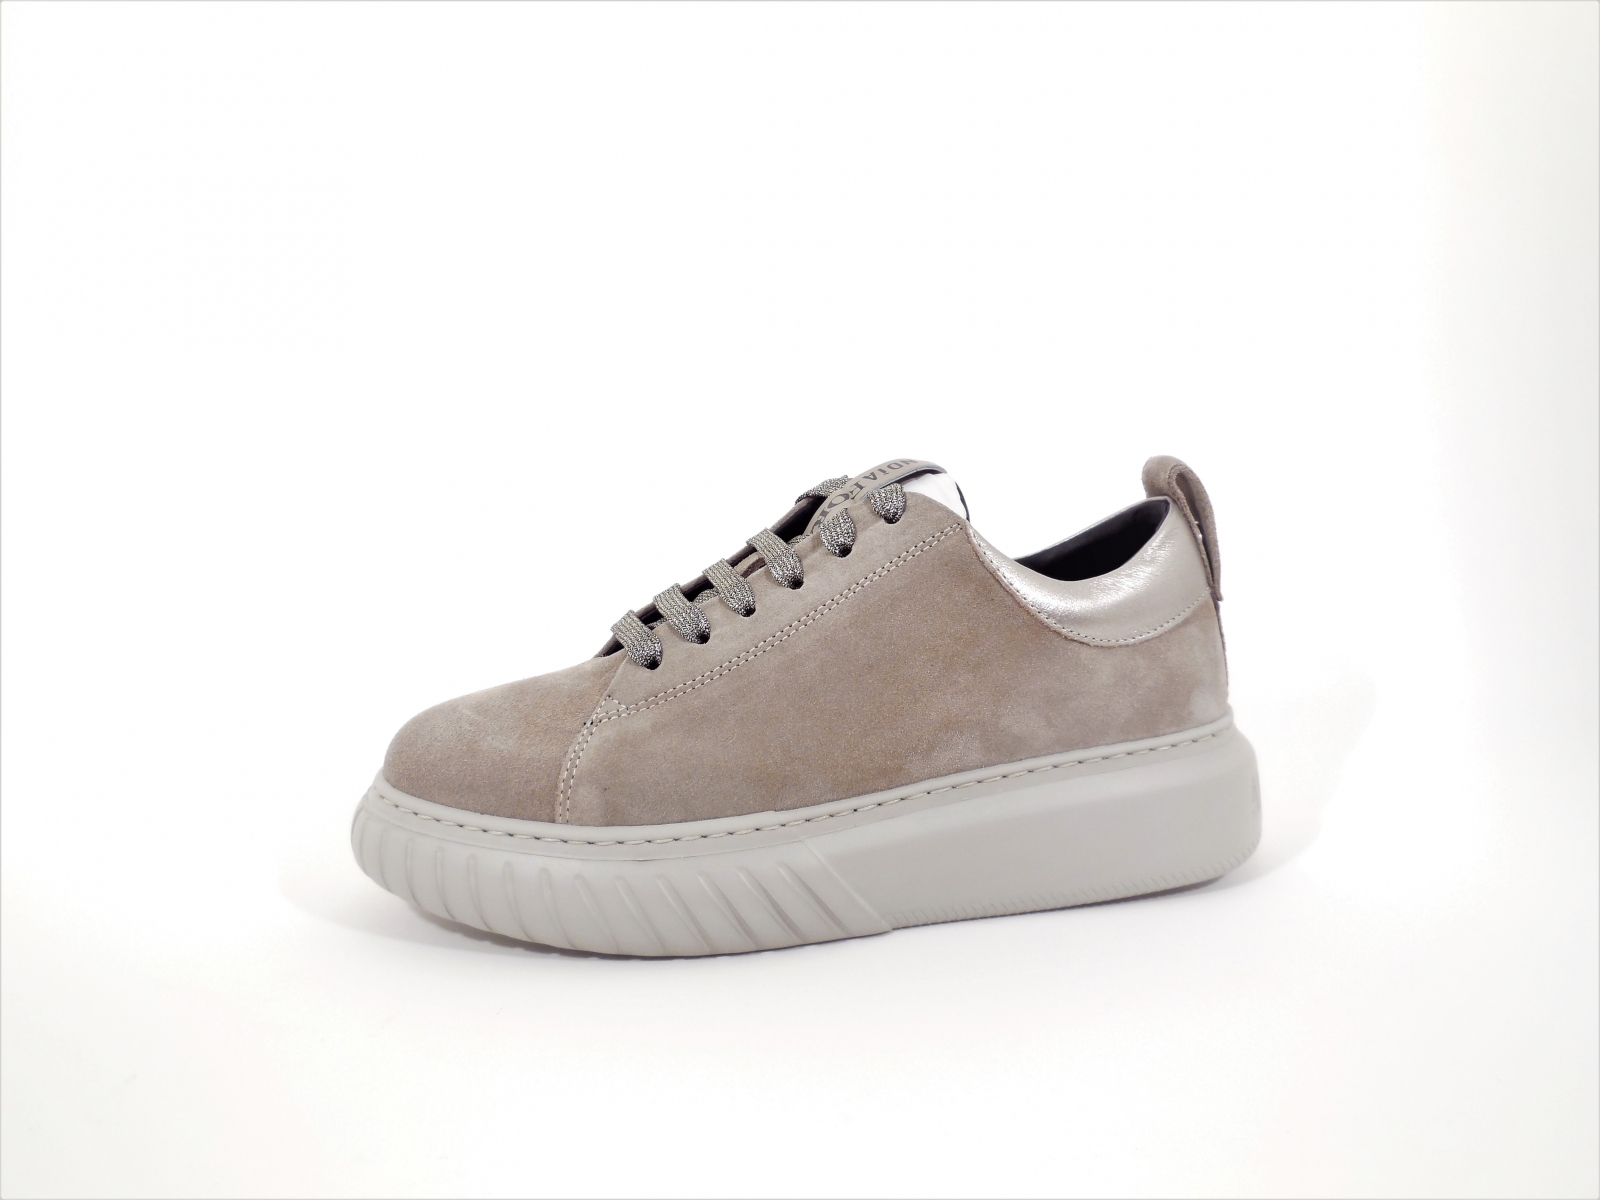 Basket taupe suede